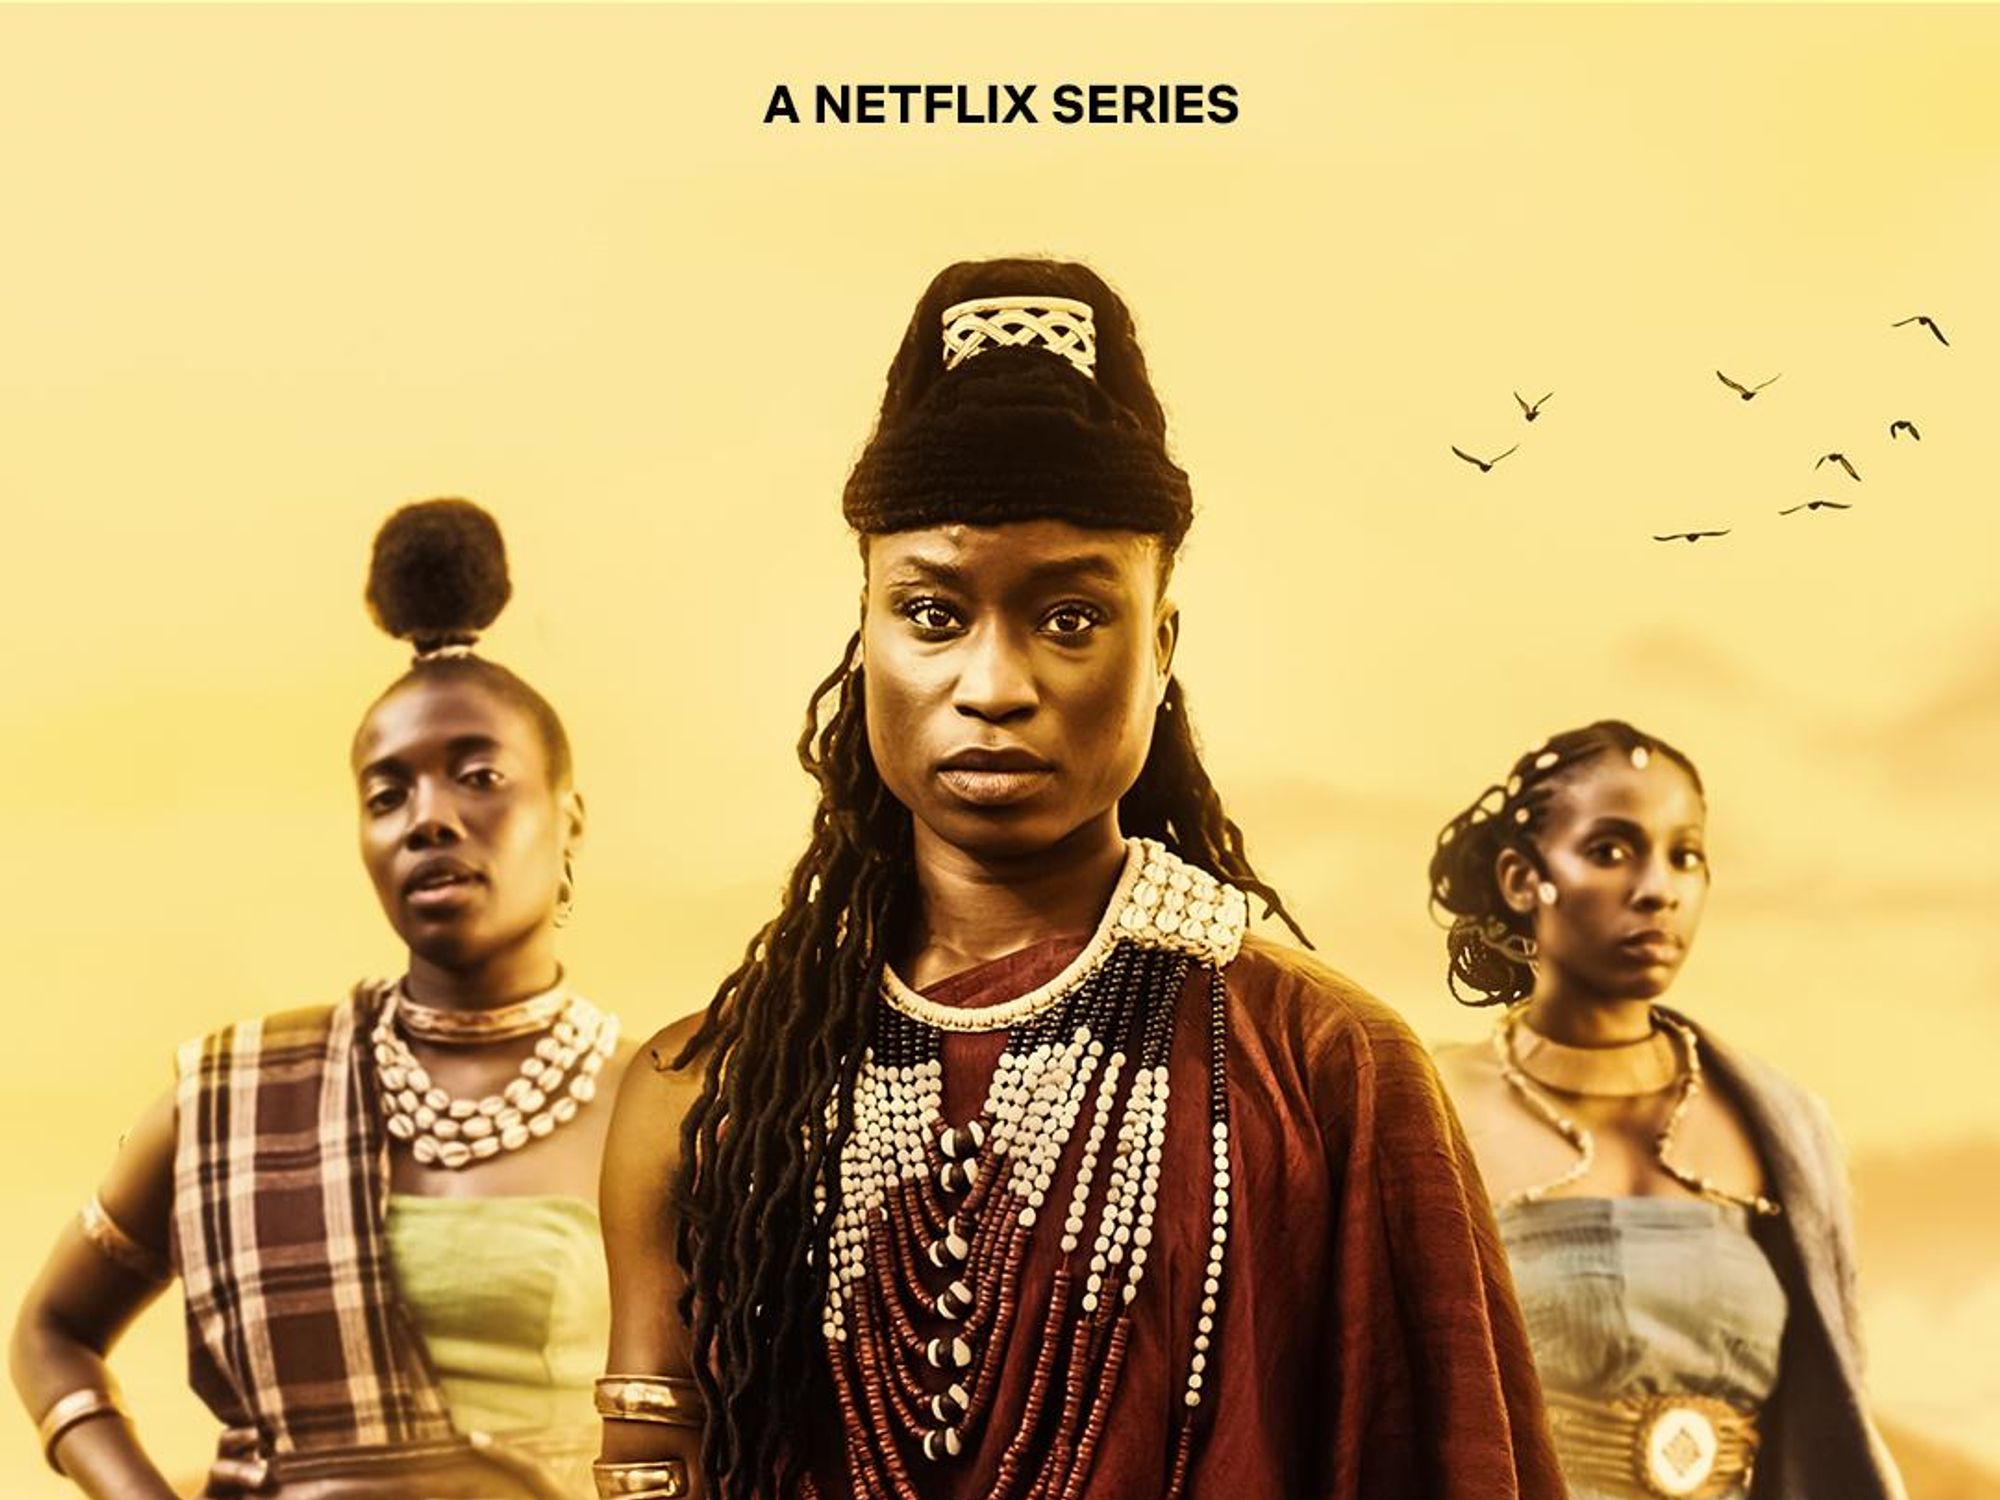 Netflix Releases Trailer For New Documentary Series 'African Queens'